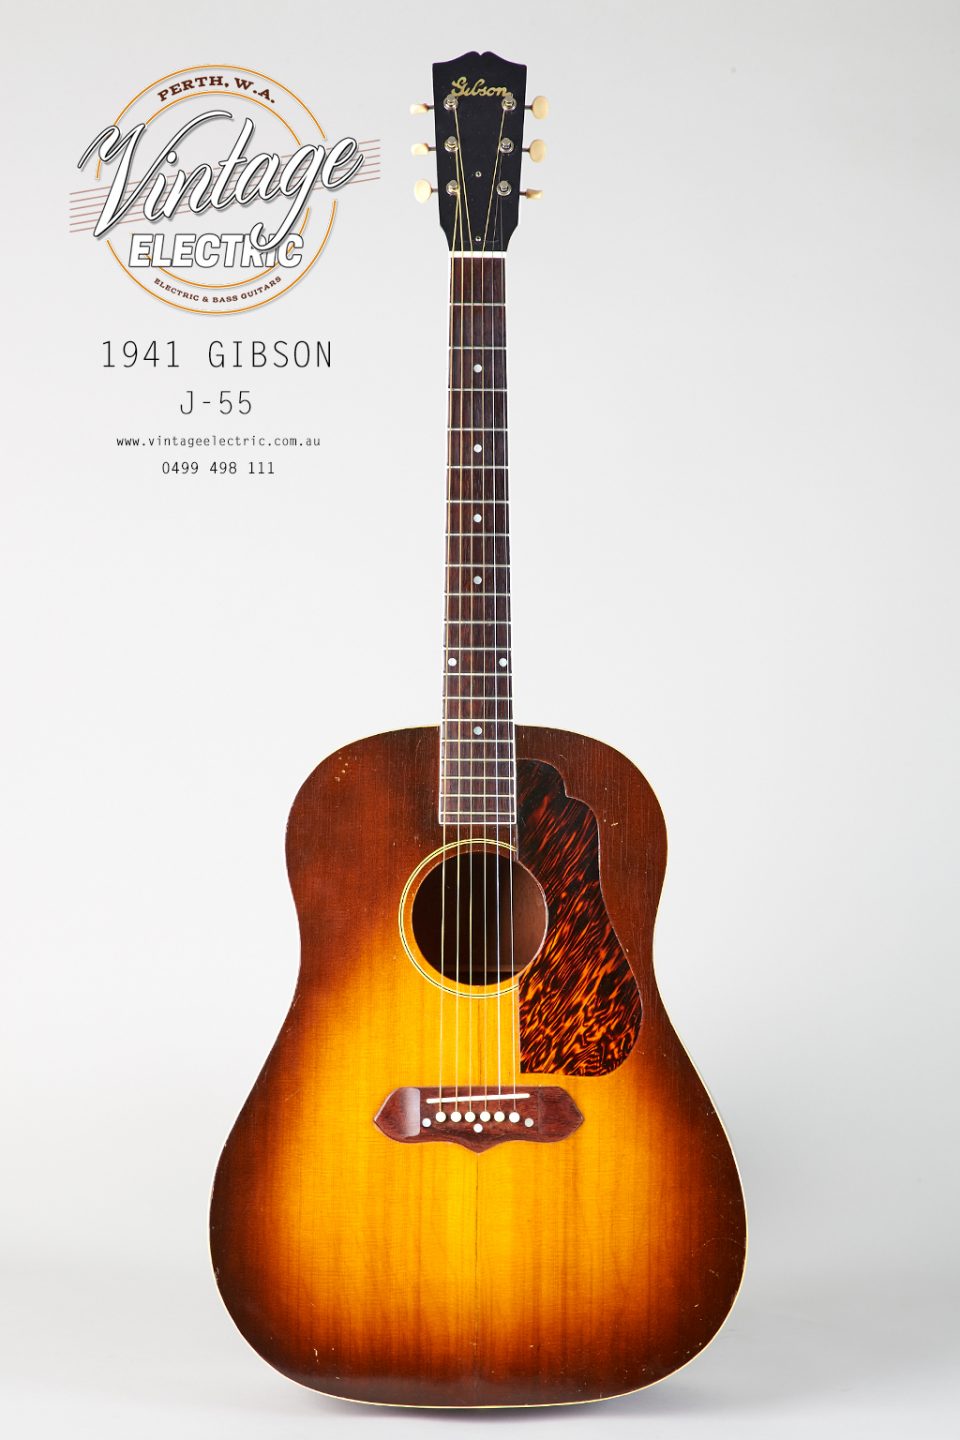 1941 Gibson J-55 Acoustic